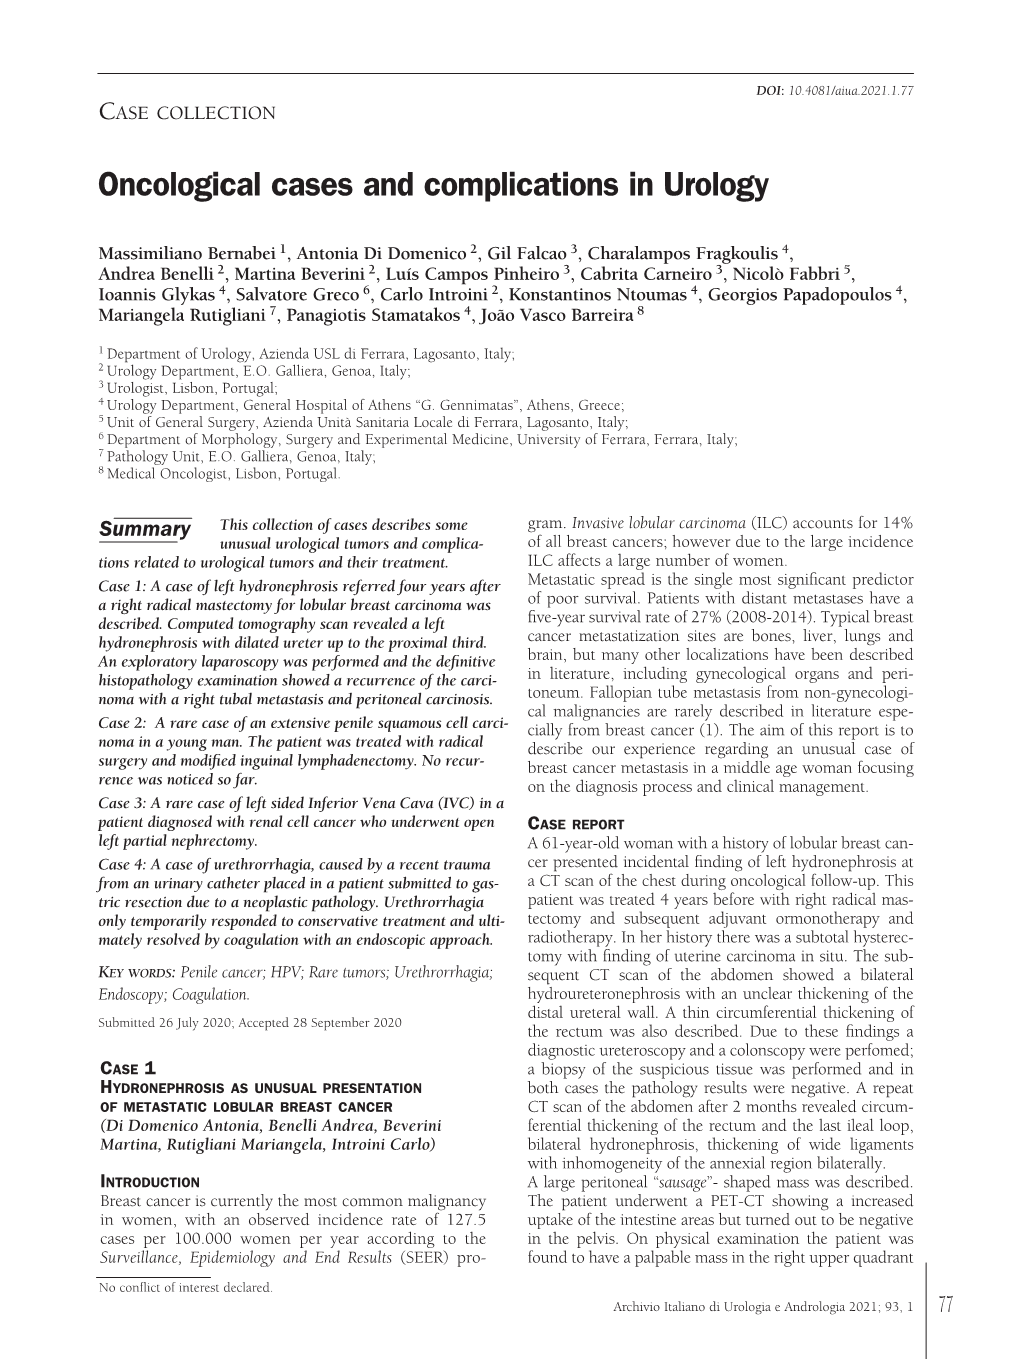 Oncological Cases and Complications in Urology